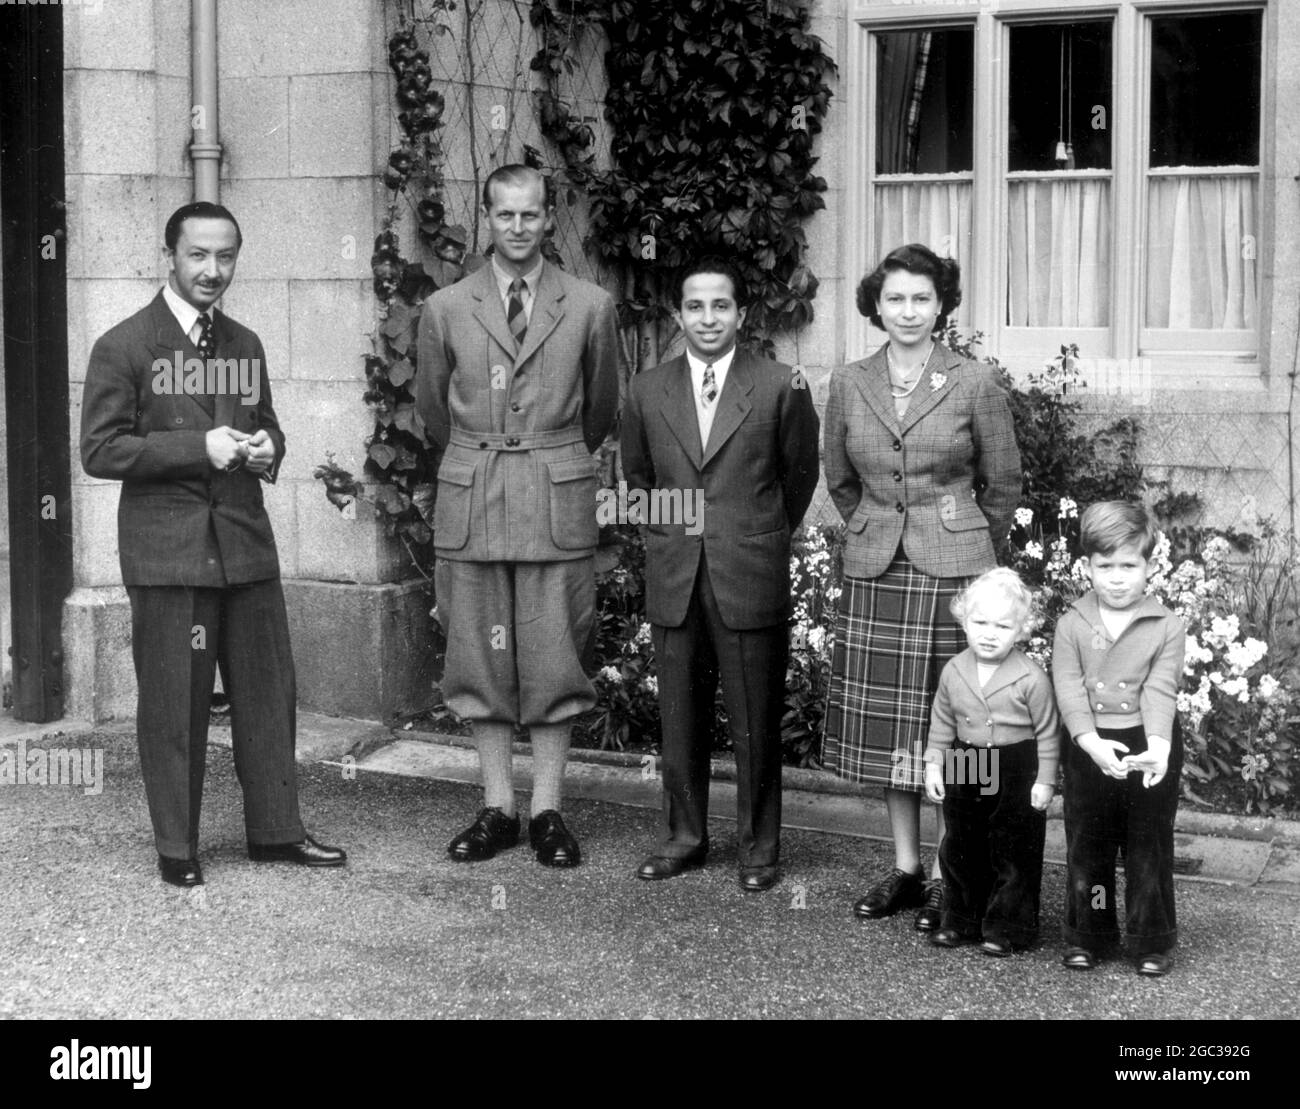 Balmoral, Scotland: The Duke of Edinburgh stands between Princess Anne and Prince Charles, as, together with Queen Elizabeth, they pose for their picture in the grounds of Balmoral Castle with 17-year old King Feisal of Iraq and his uncle, Emir Abdul Illah, the Prince Regent. The boy-King, an ex-Harrow schoolboy, is the guest of the Queen and Duke at Balmoral, their country home in Scotland. 26 September 1952 Stock Photo